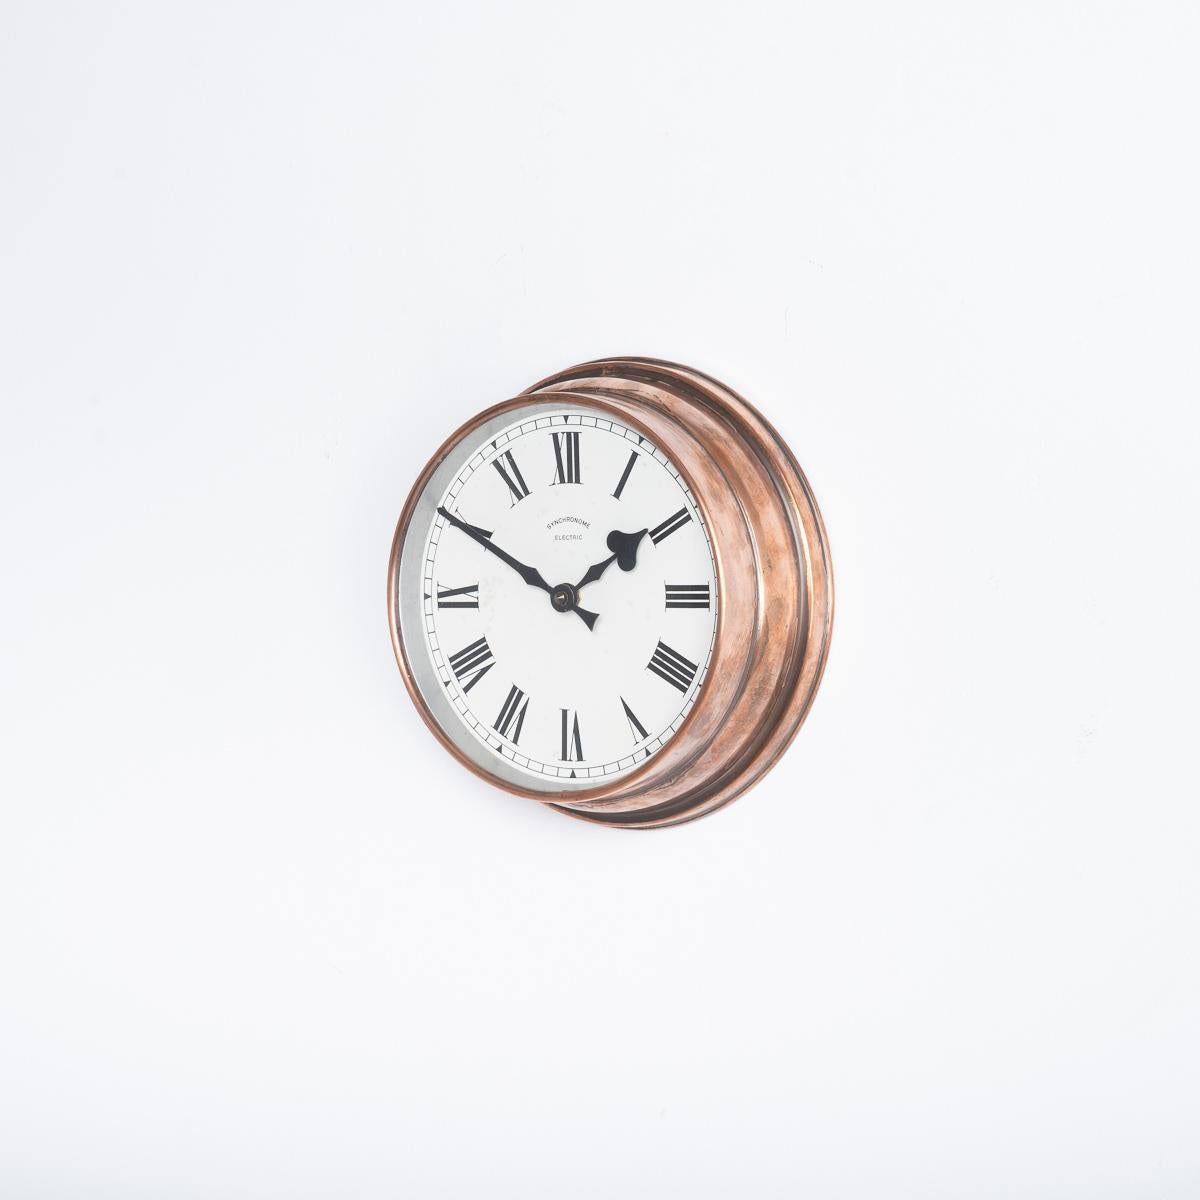 Synchronome Vintage Industrial Copper Case Wall Clock 3